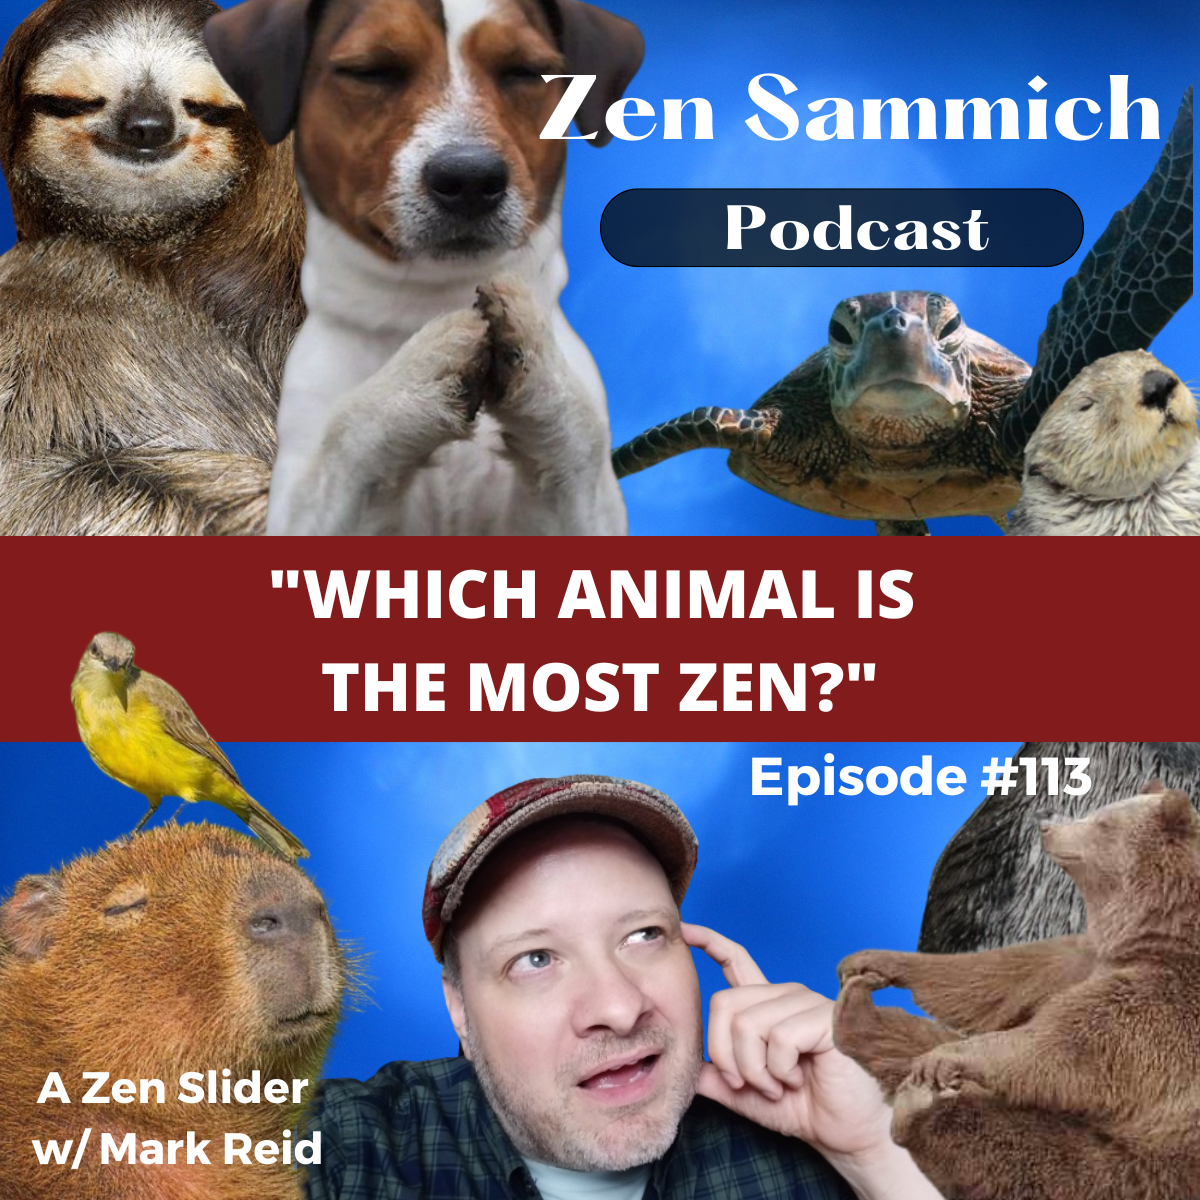 What animal is the most Zen